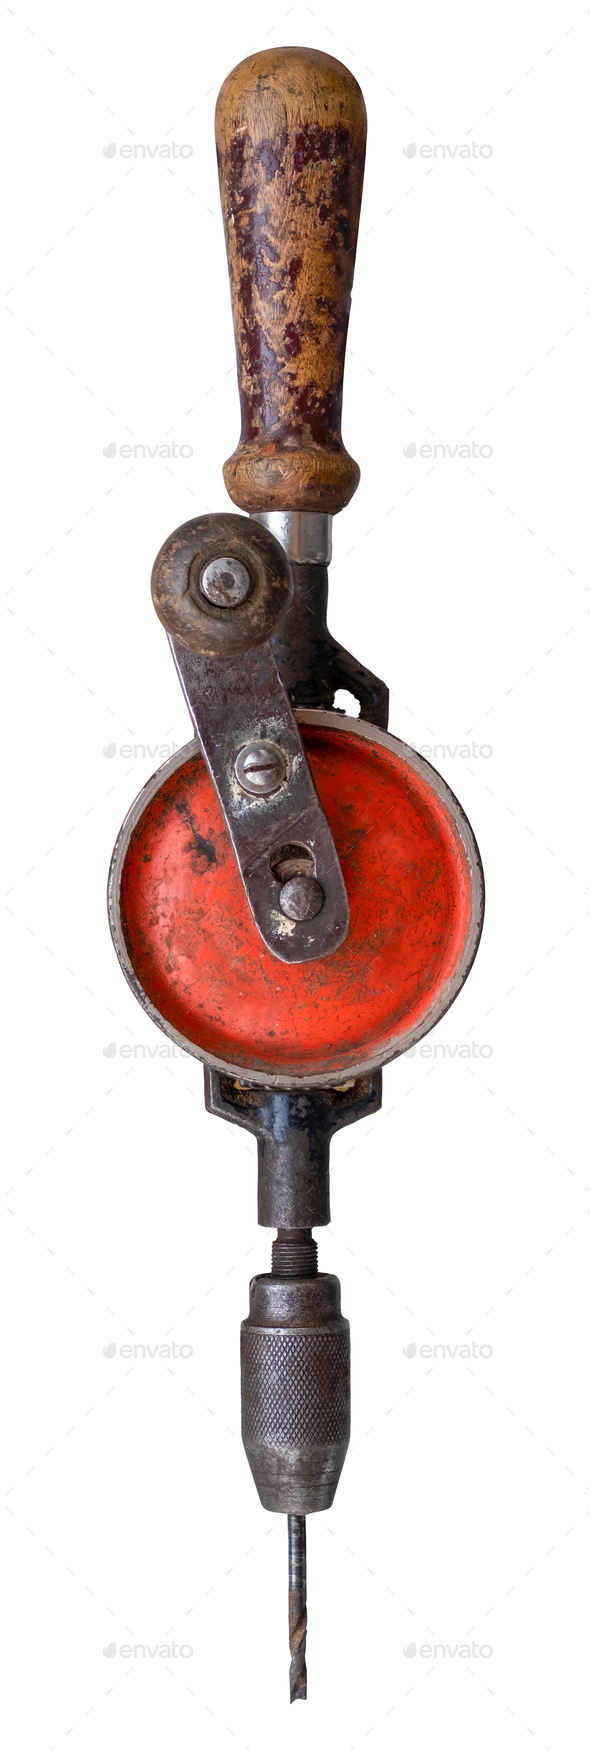 Rustic Vintage Hand Drill - Stock Photo - Images